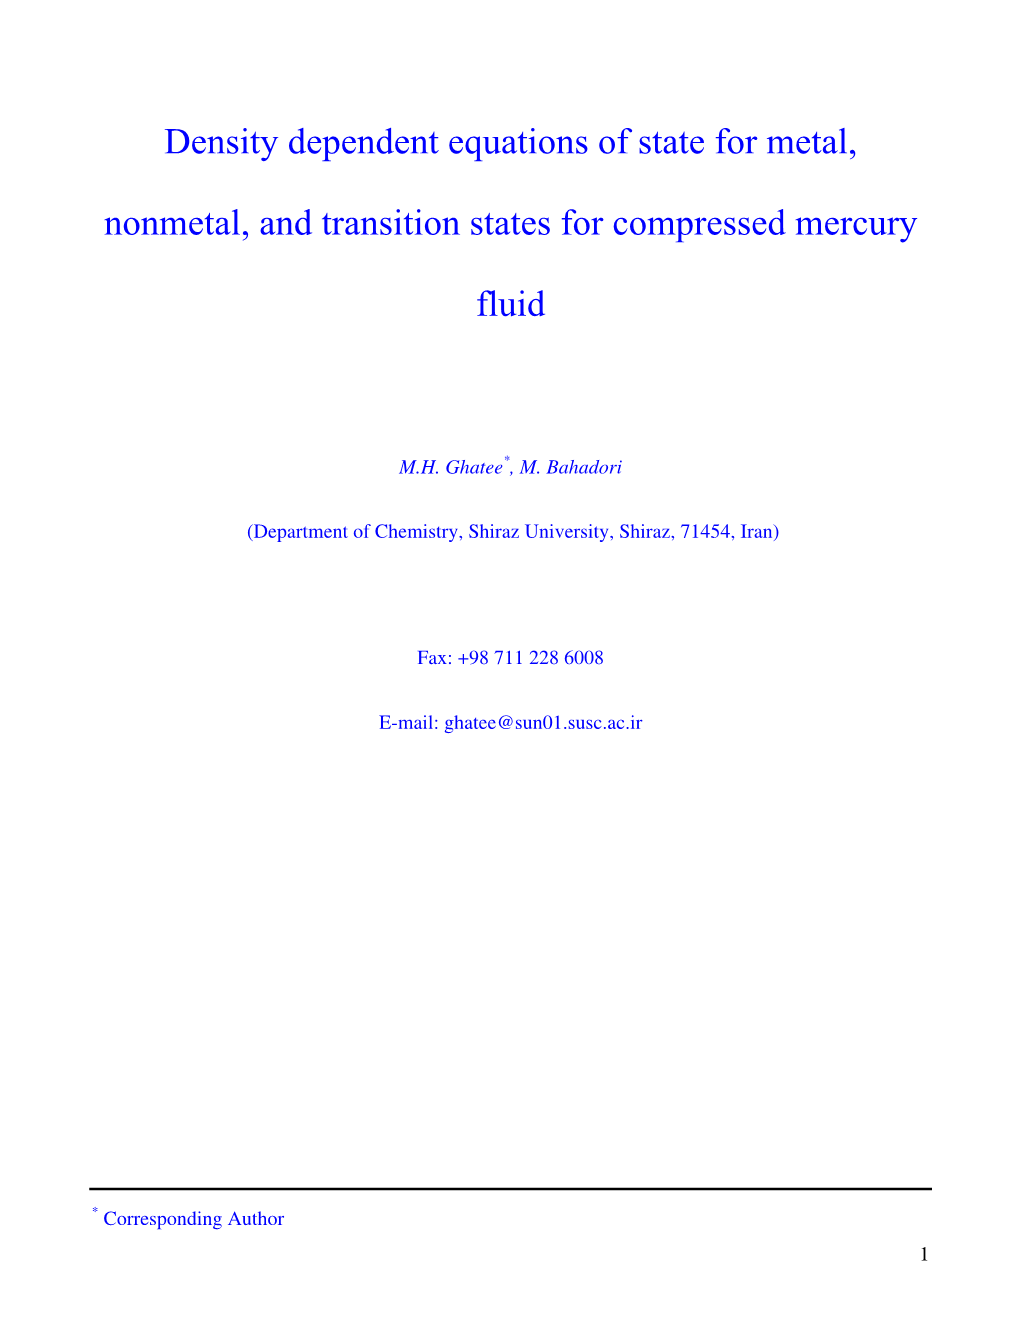 Density Dependent Equations of State for Metal, Nonmetal, and Transition